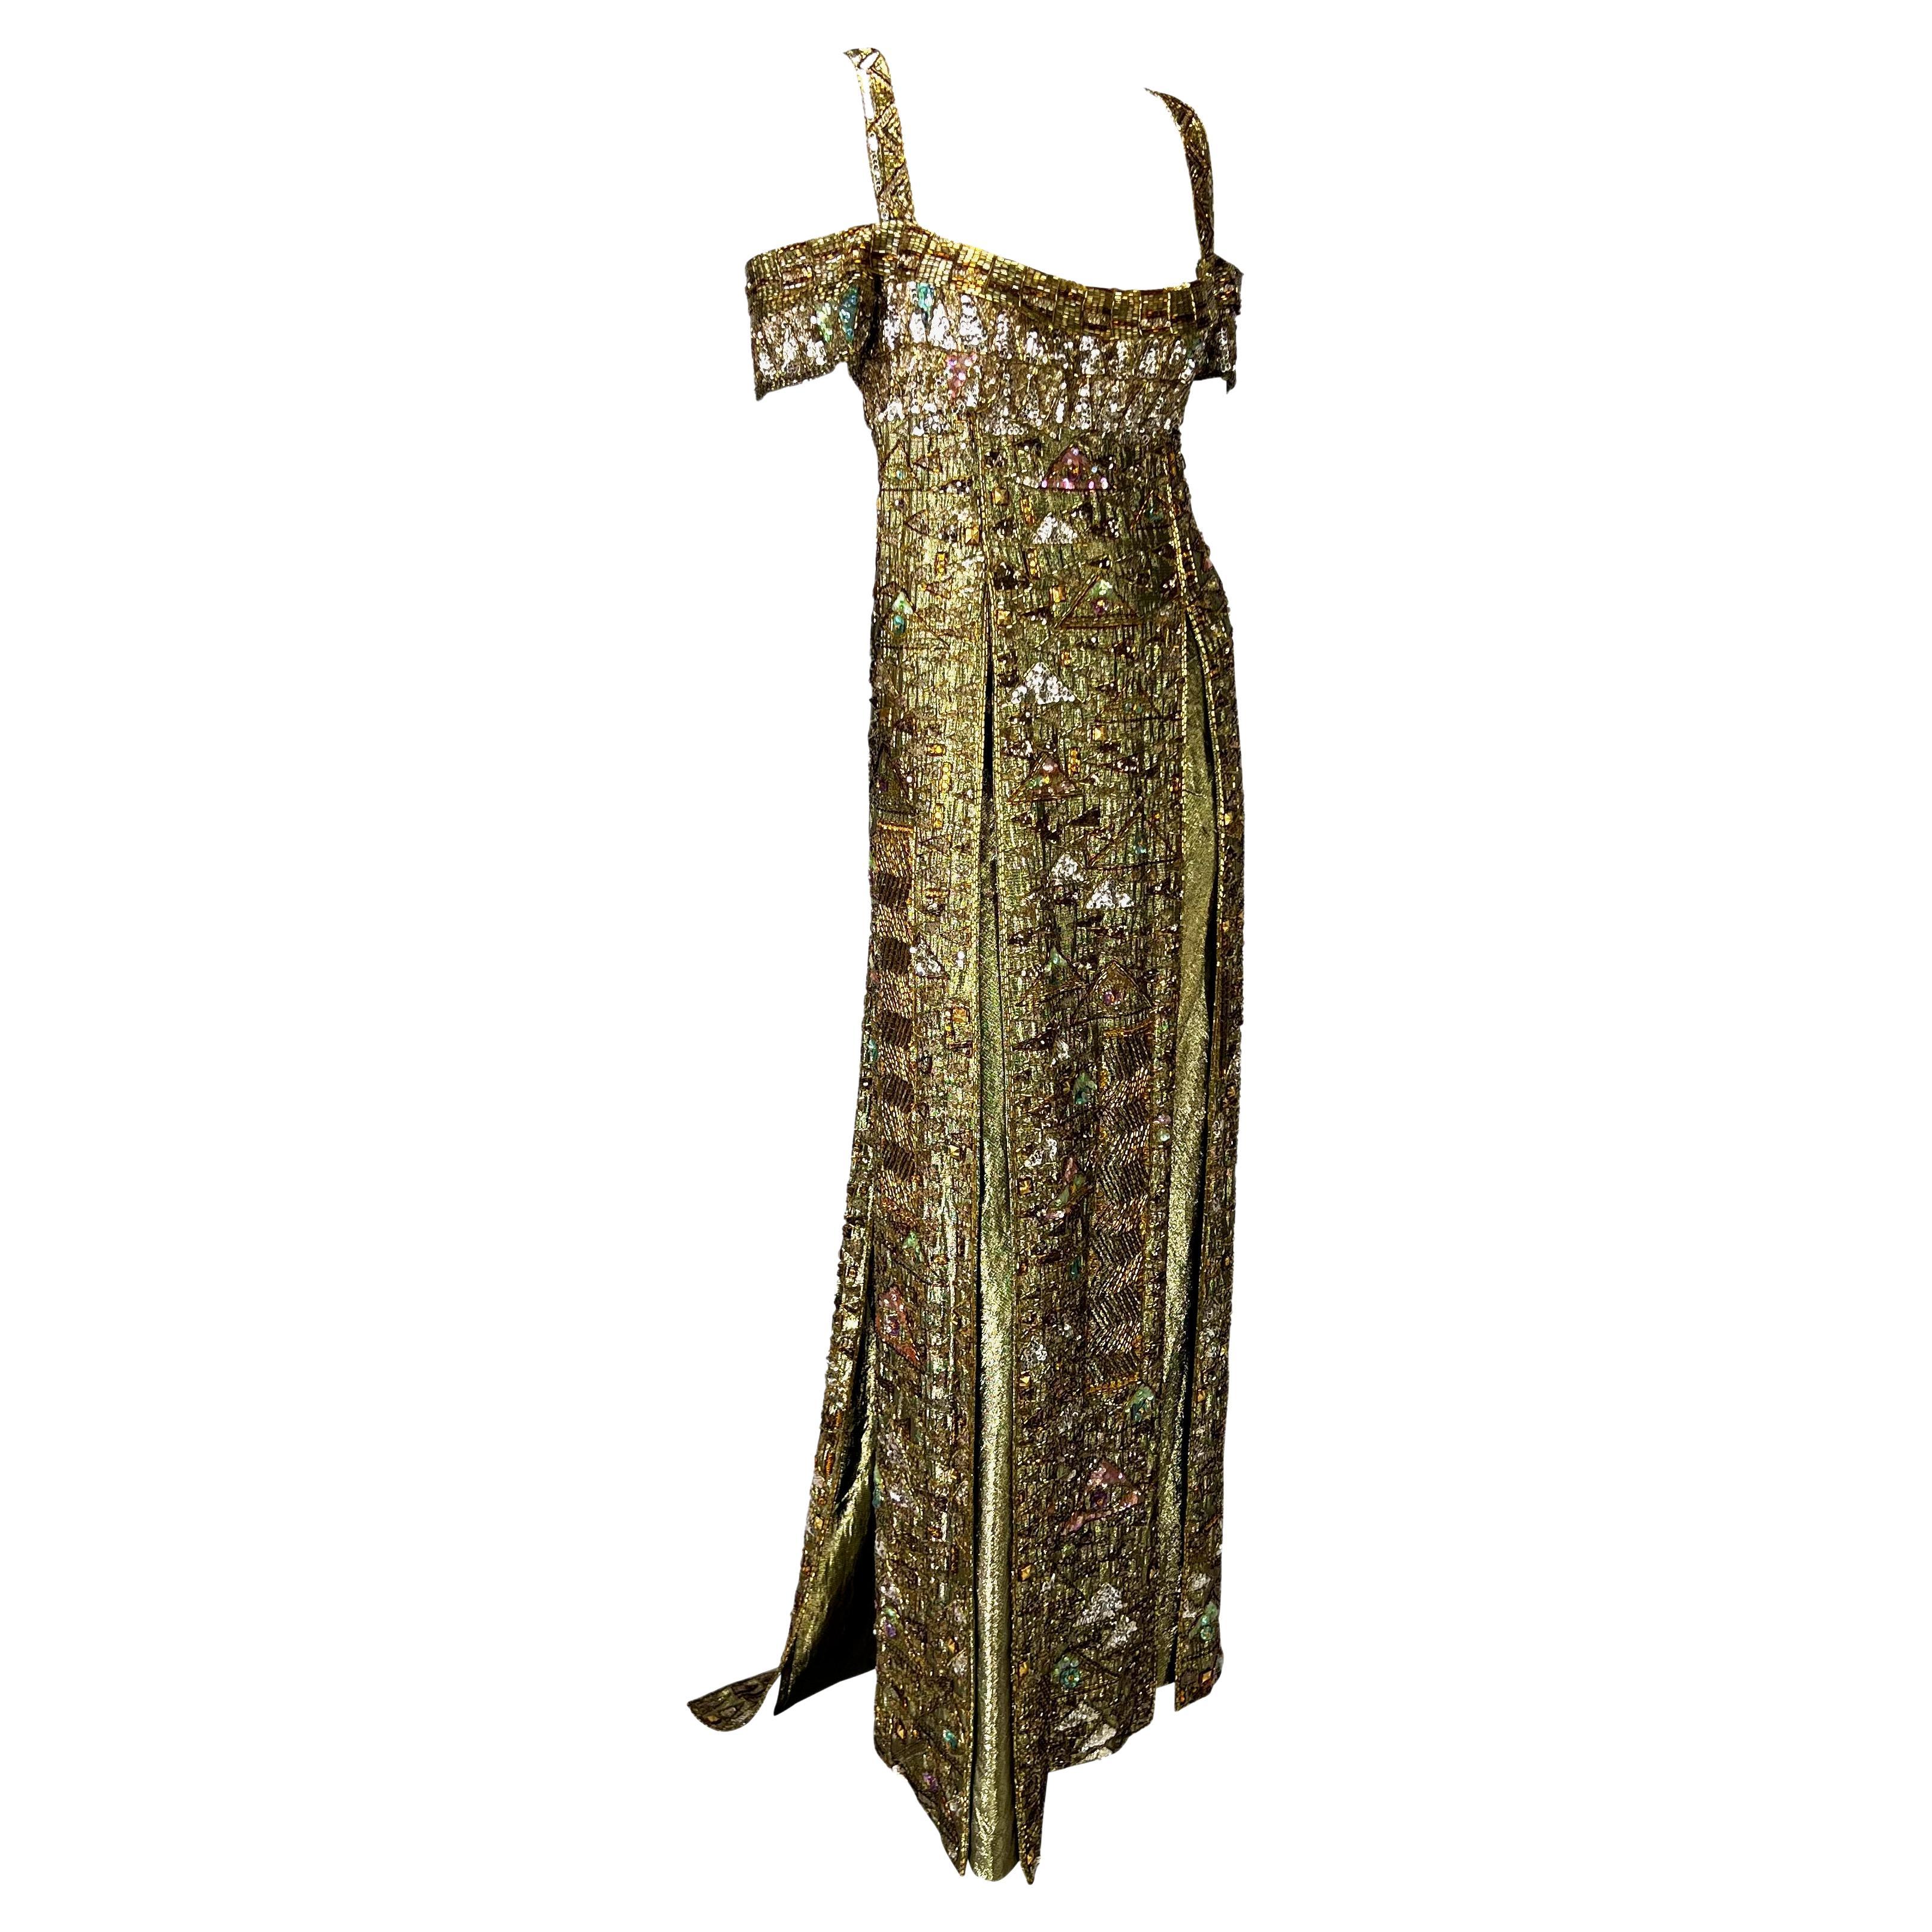 Vintage 1920's French Couture Metallic Gold Embroidered Lamé Draped Dress